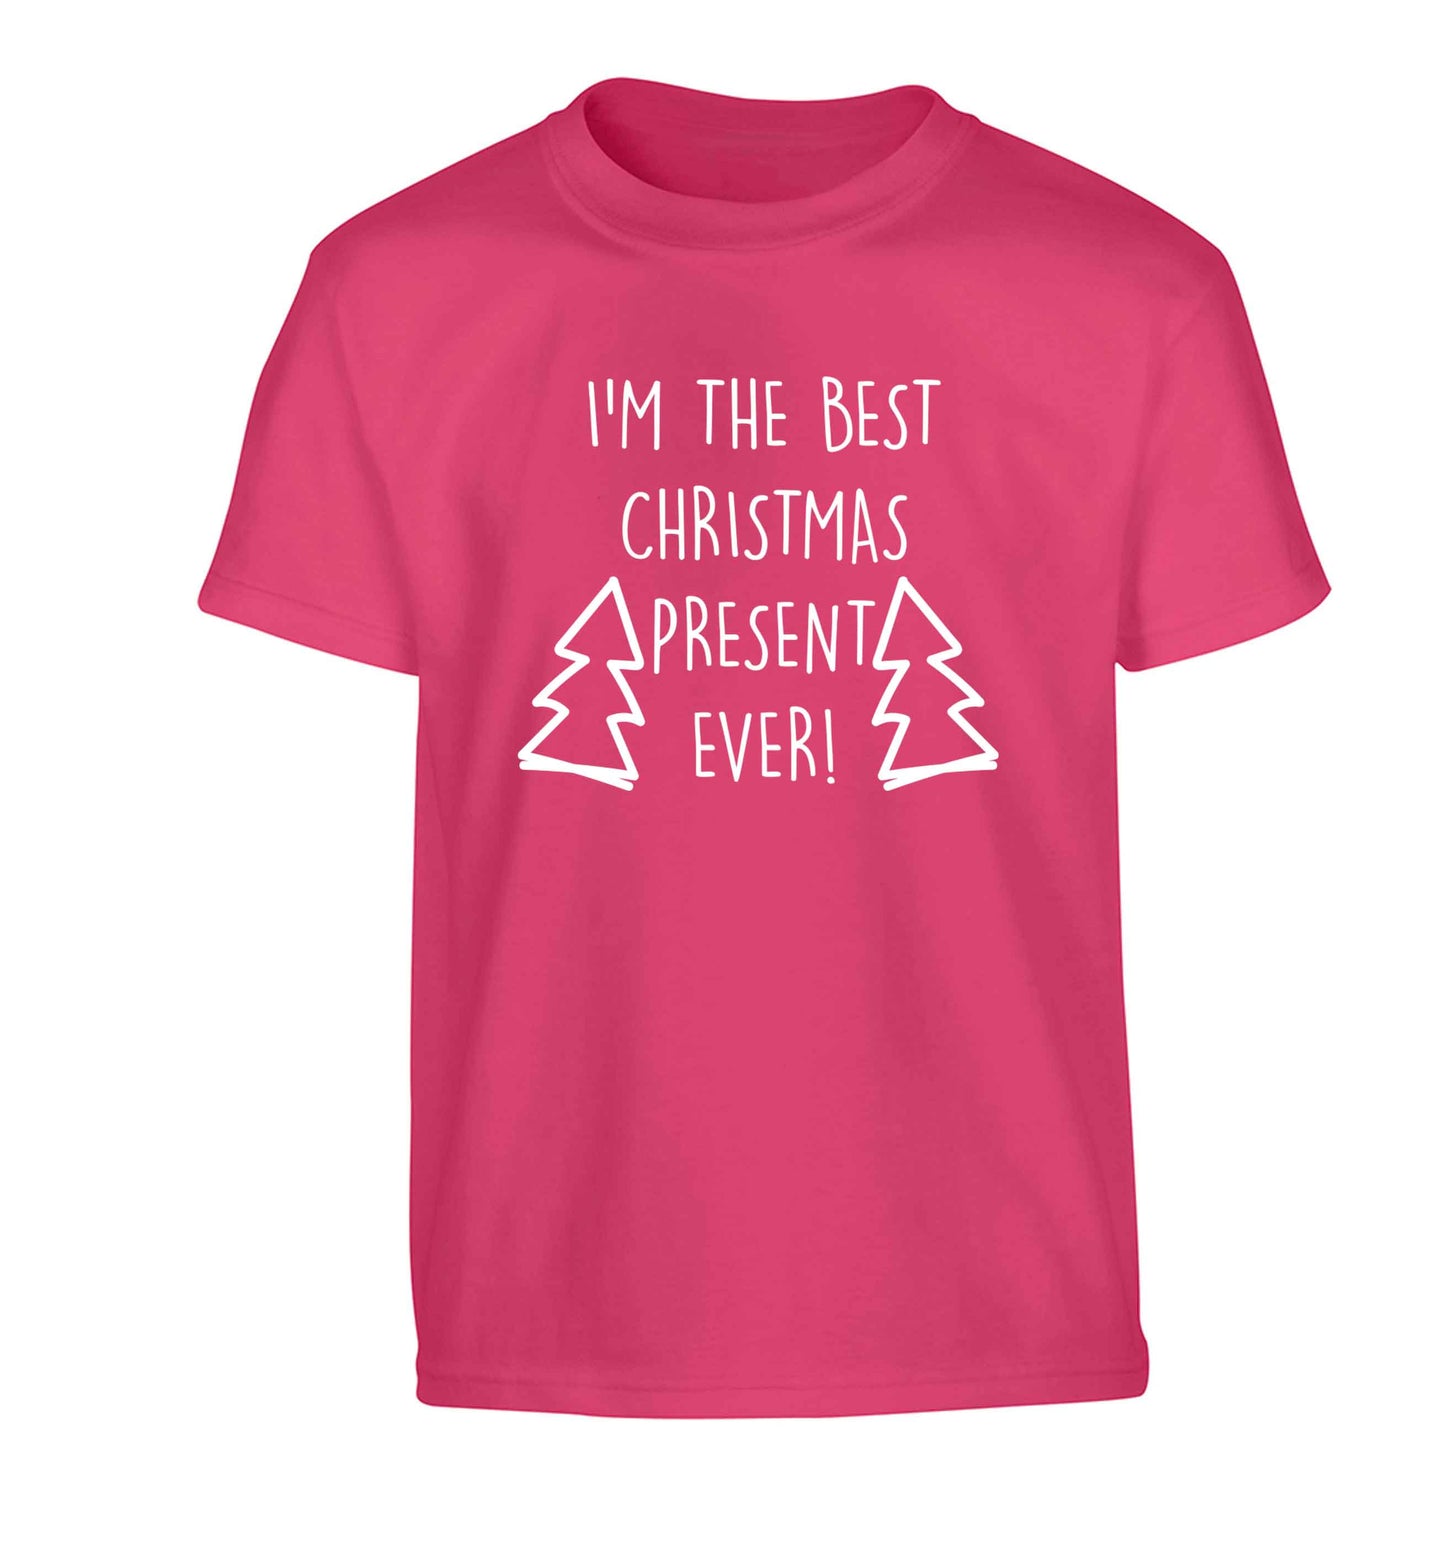 I'm the best Christmas present ever Children's pink Tshirt 12-13 Years